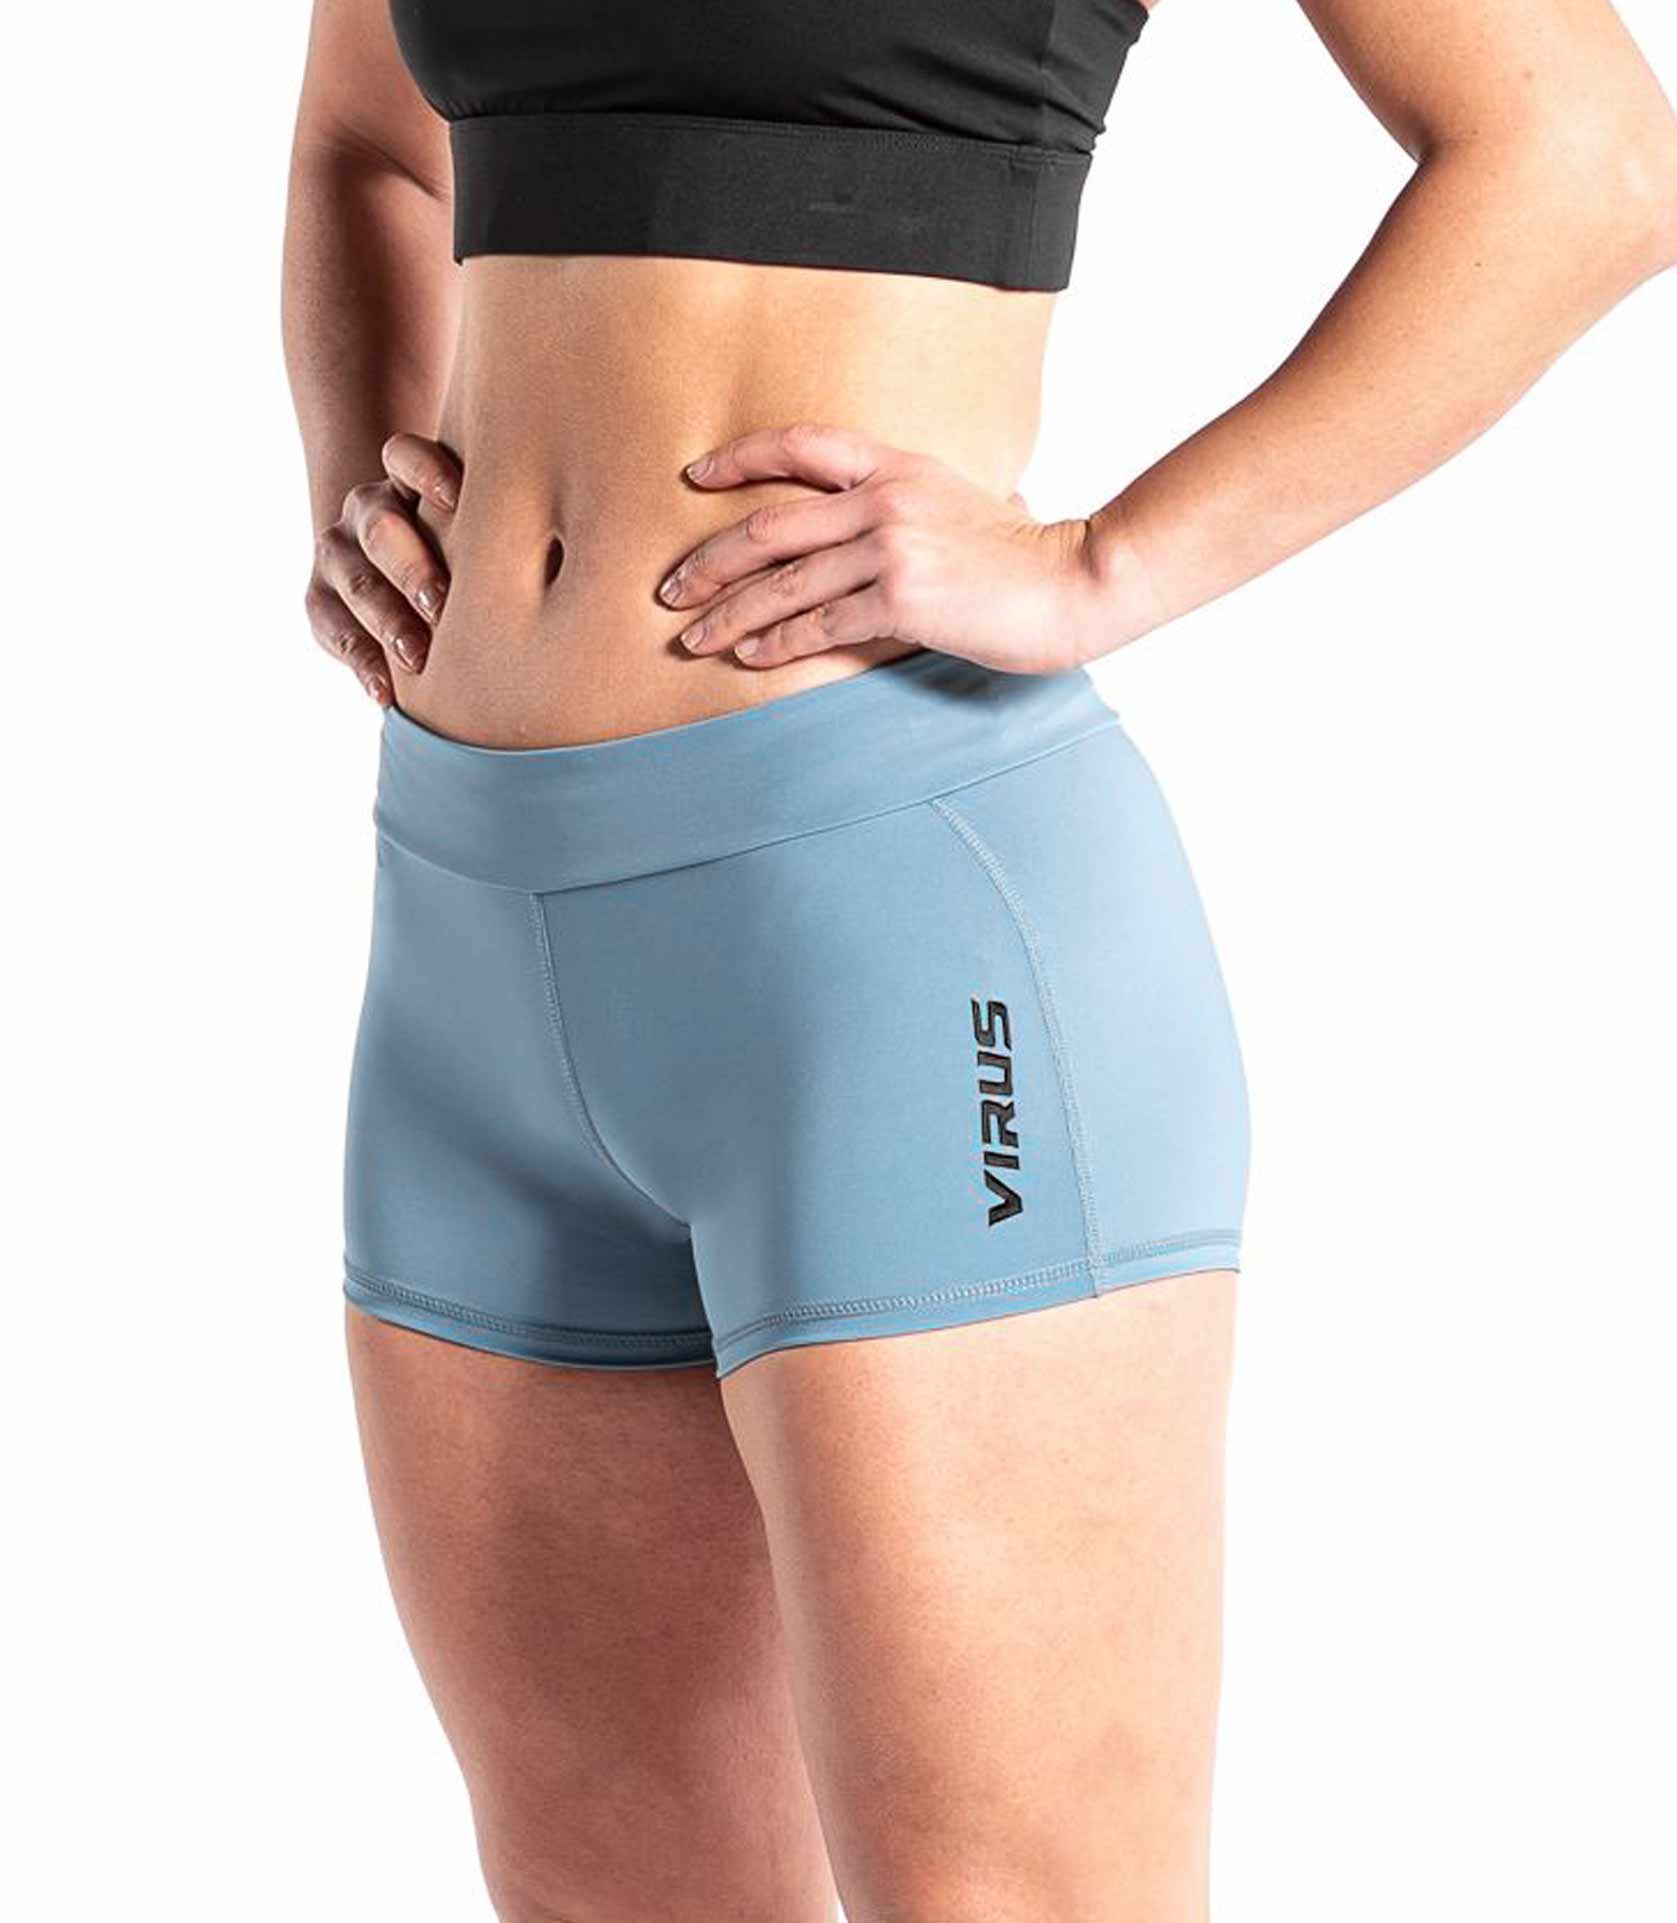  Virus Womens ECO57 Echo Stay Cool Compression Crop